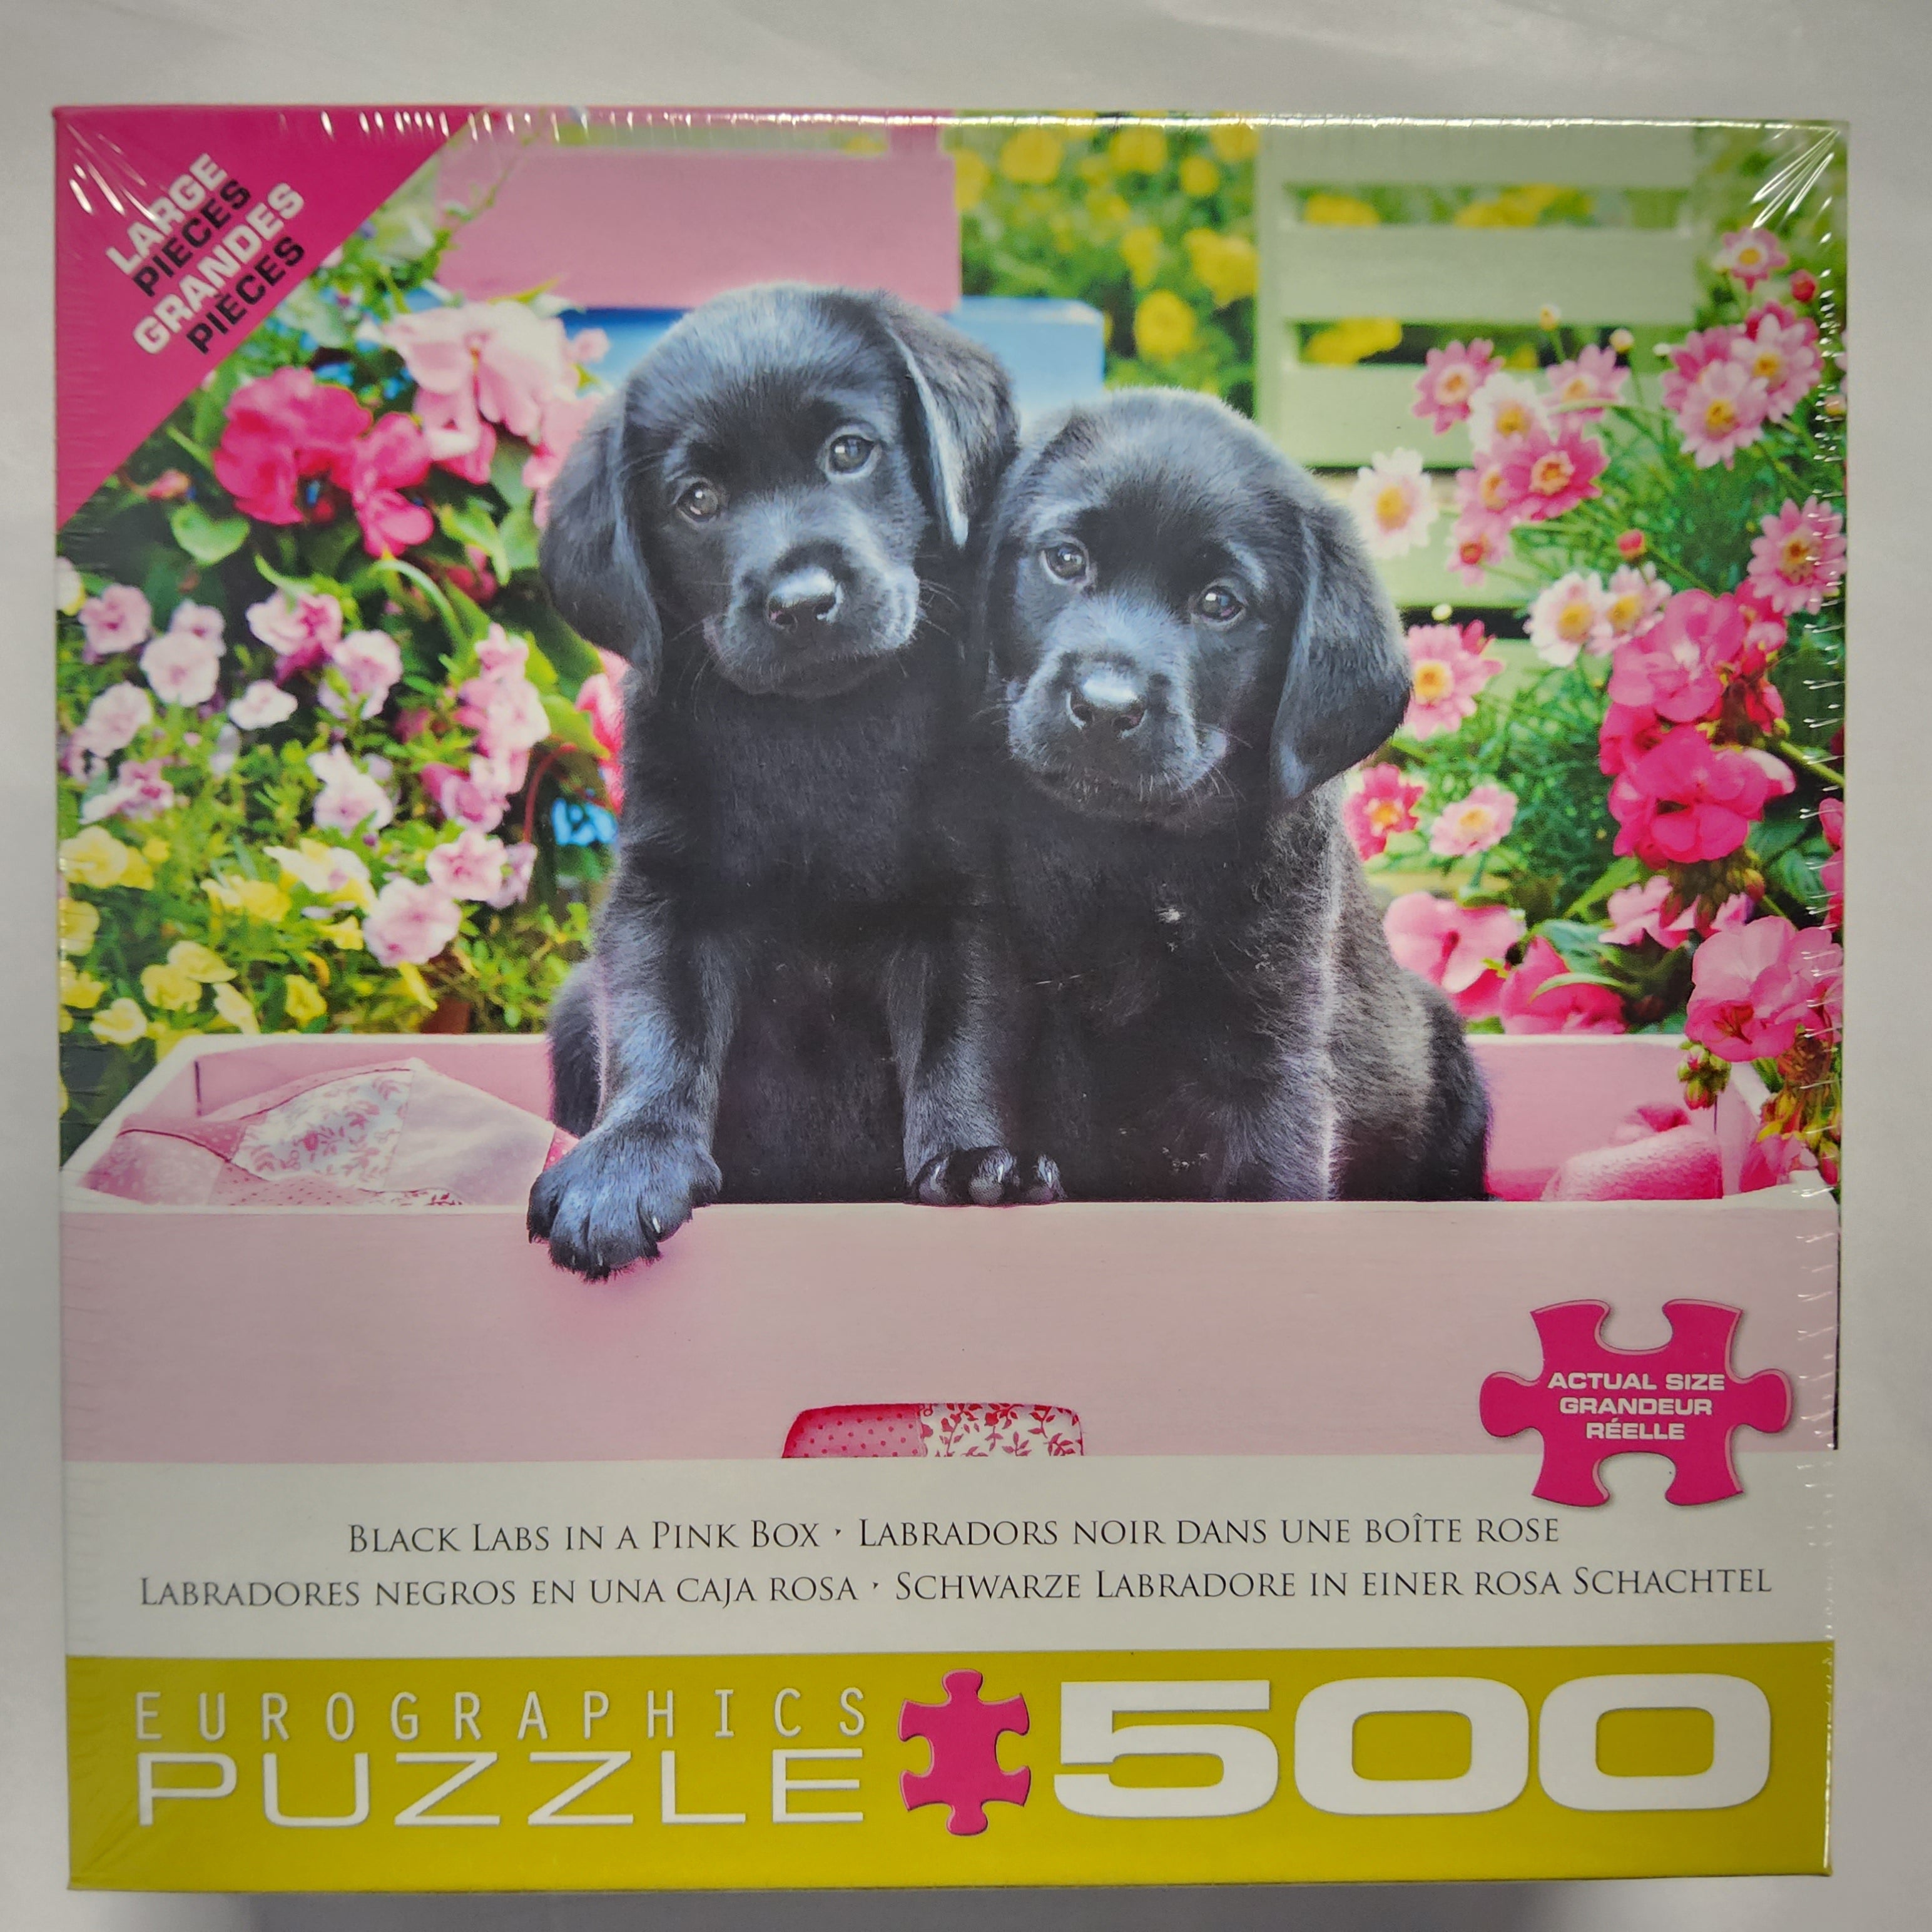 Eurographics Puzzle - Black Labs in a Pink Box - 500 Large pieces - 8500-5462